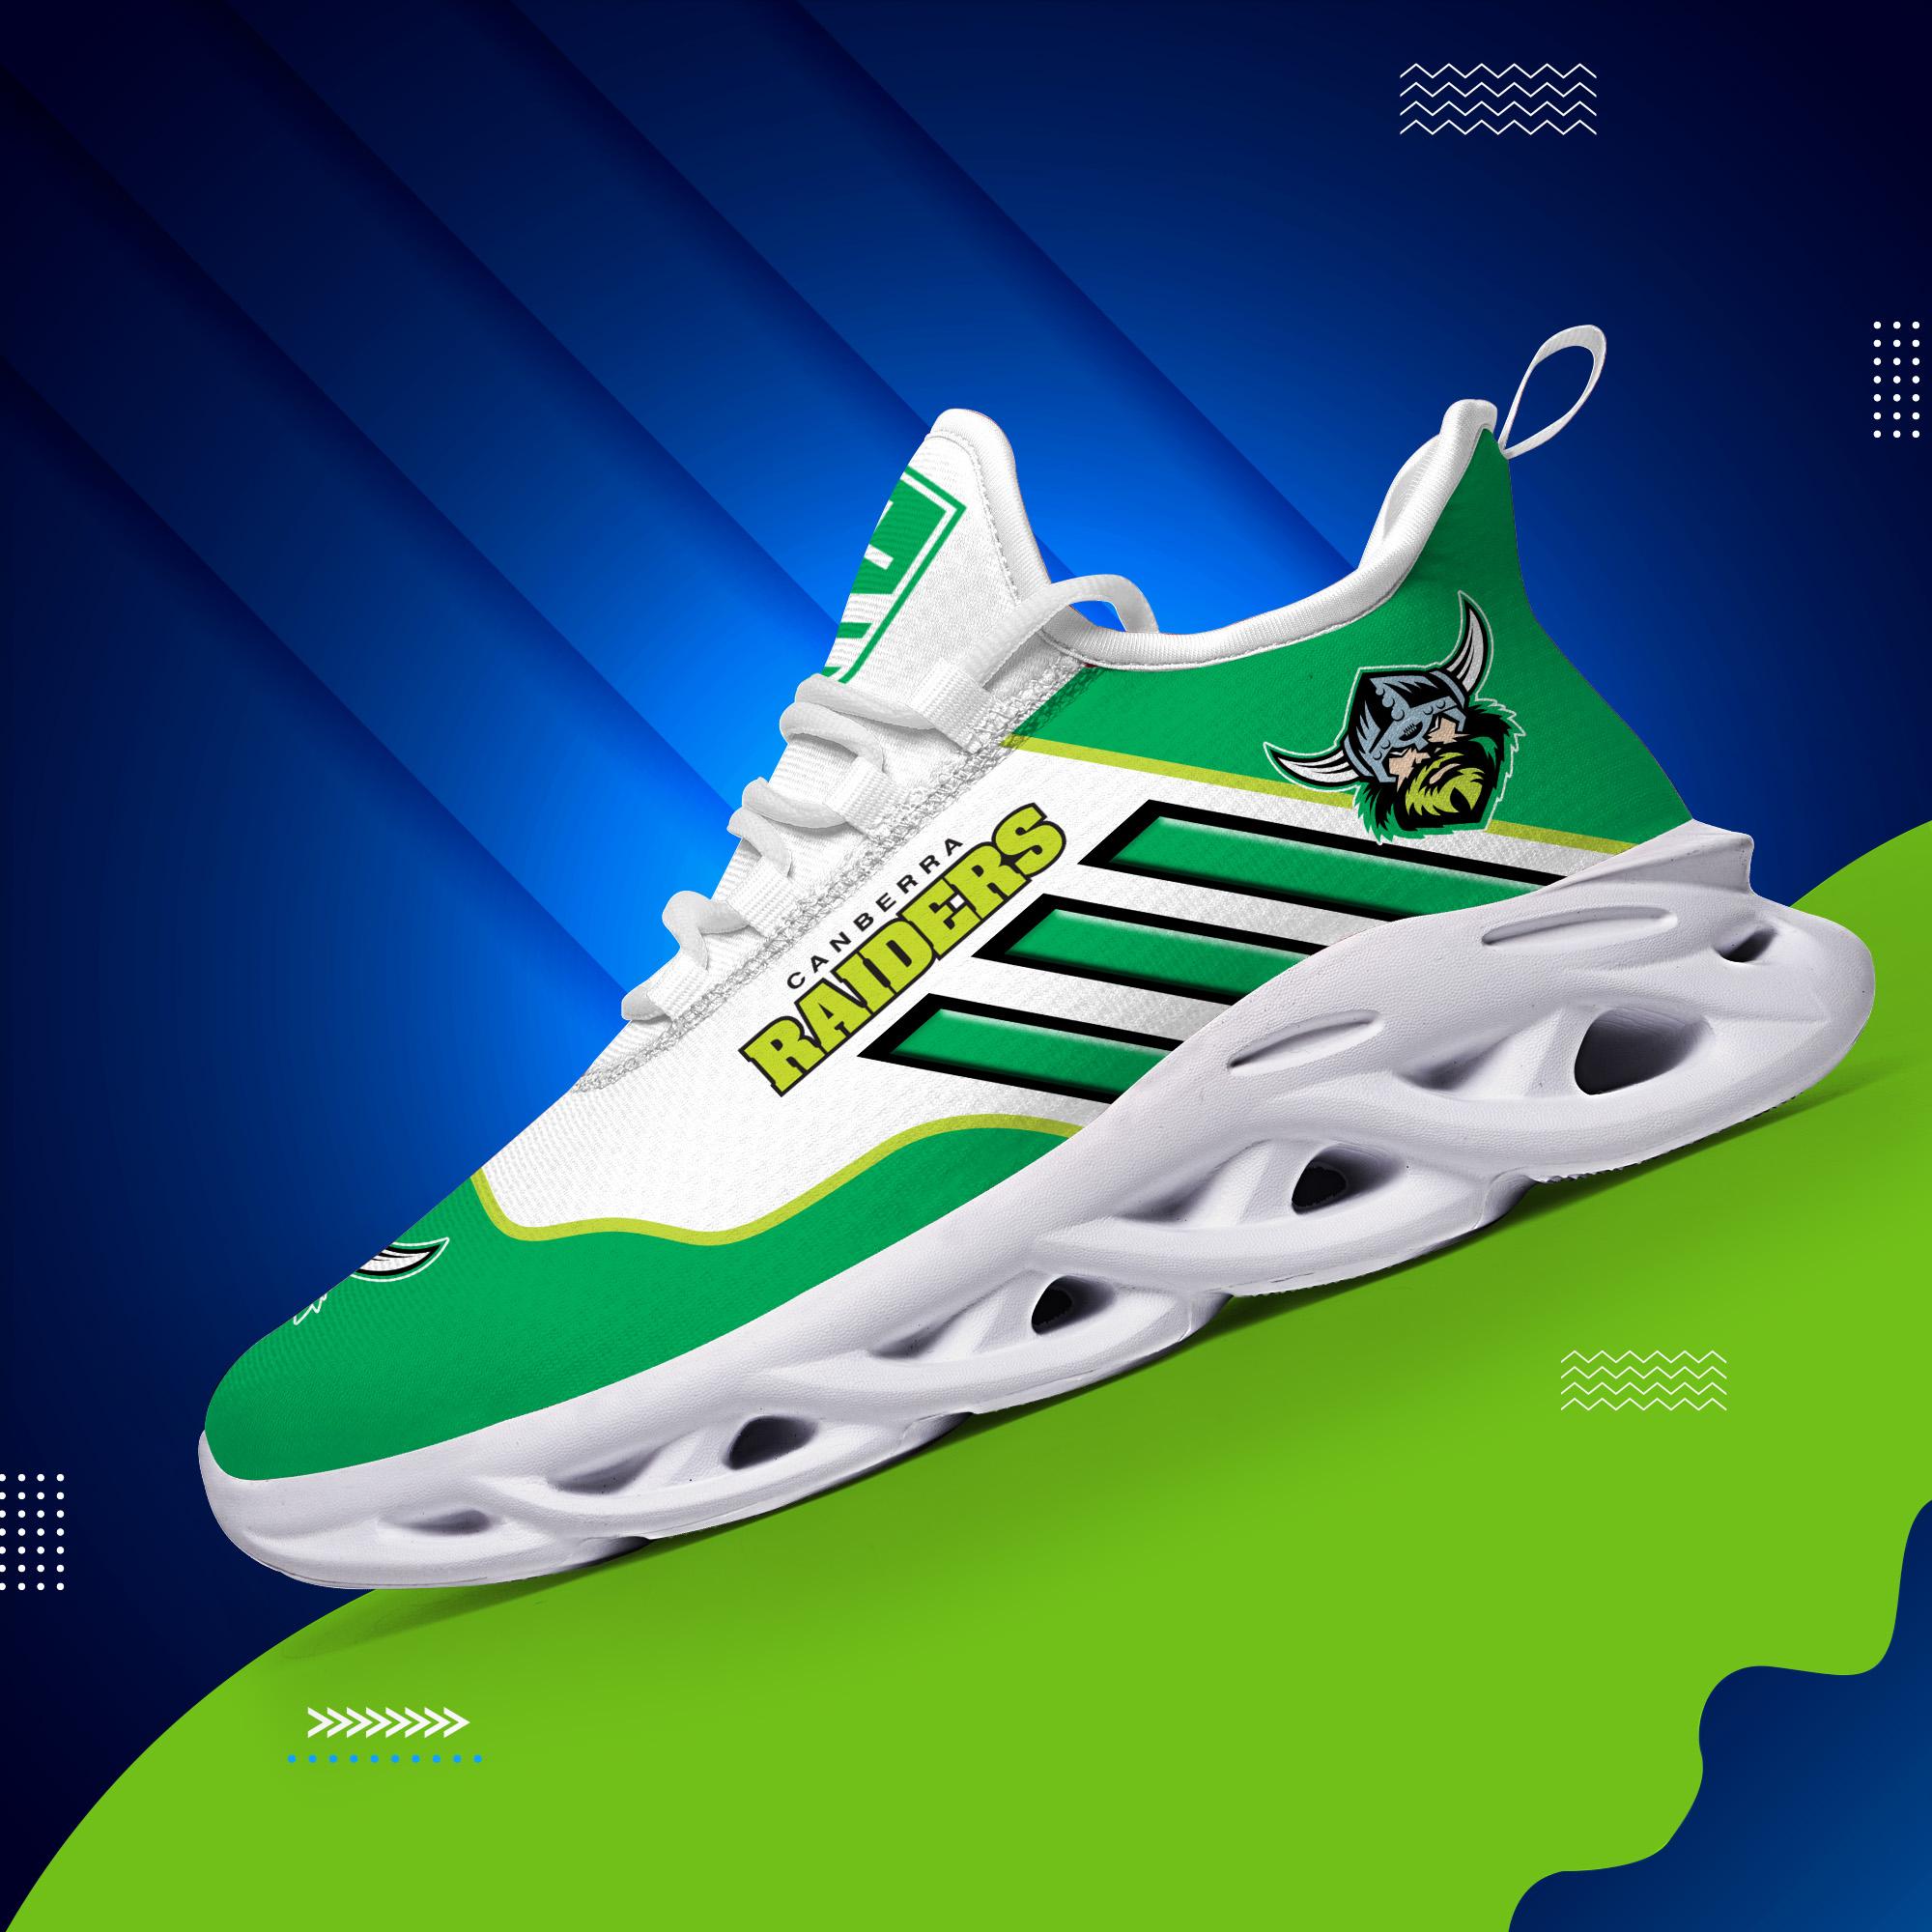 Canberra Raiders NRL Clunky Max Soul Shoes